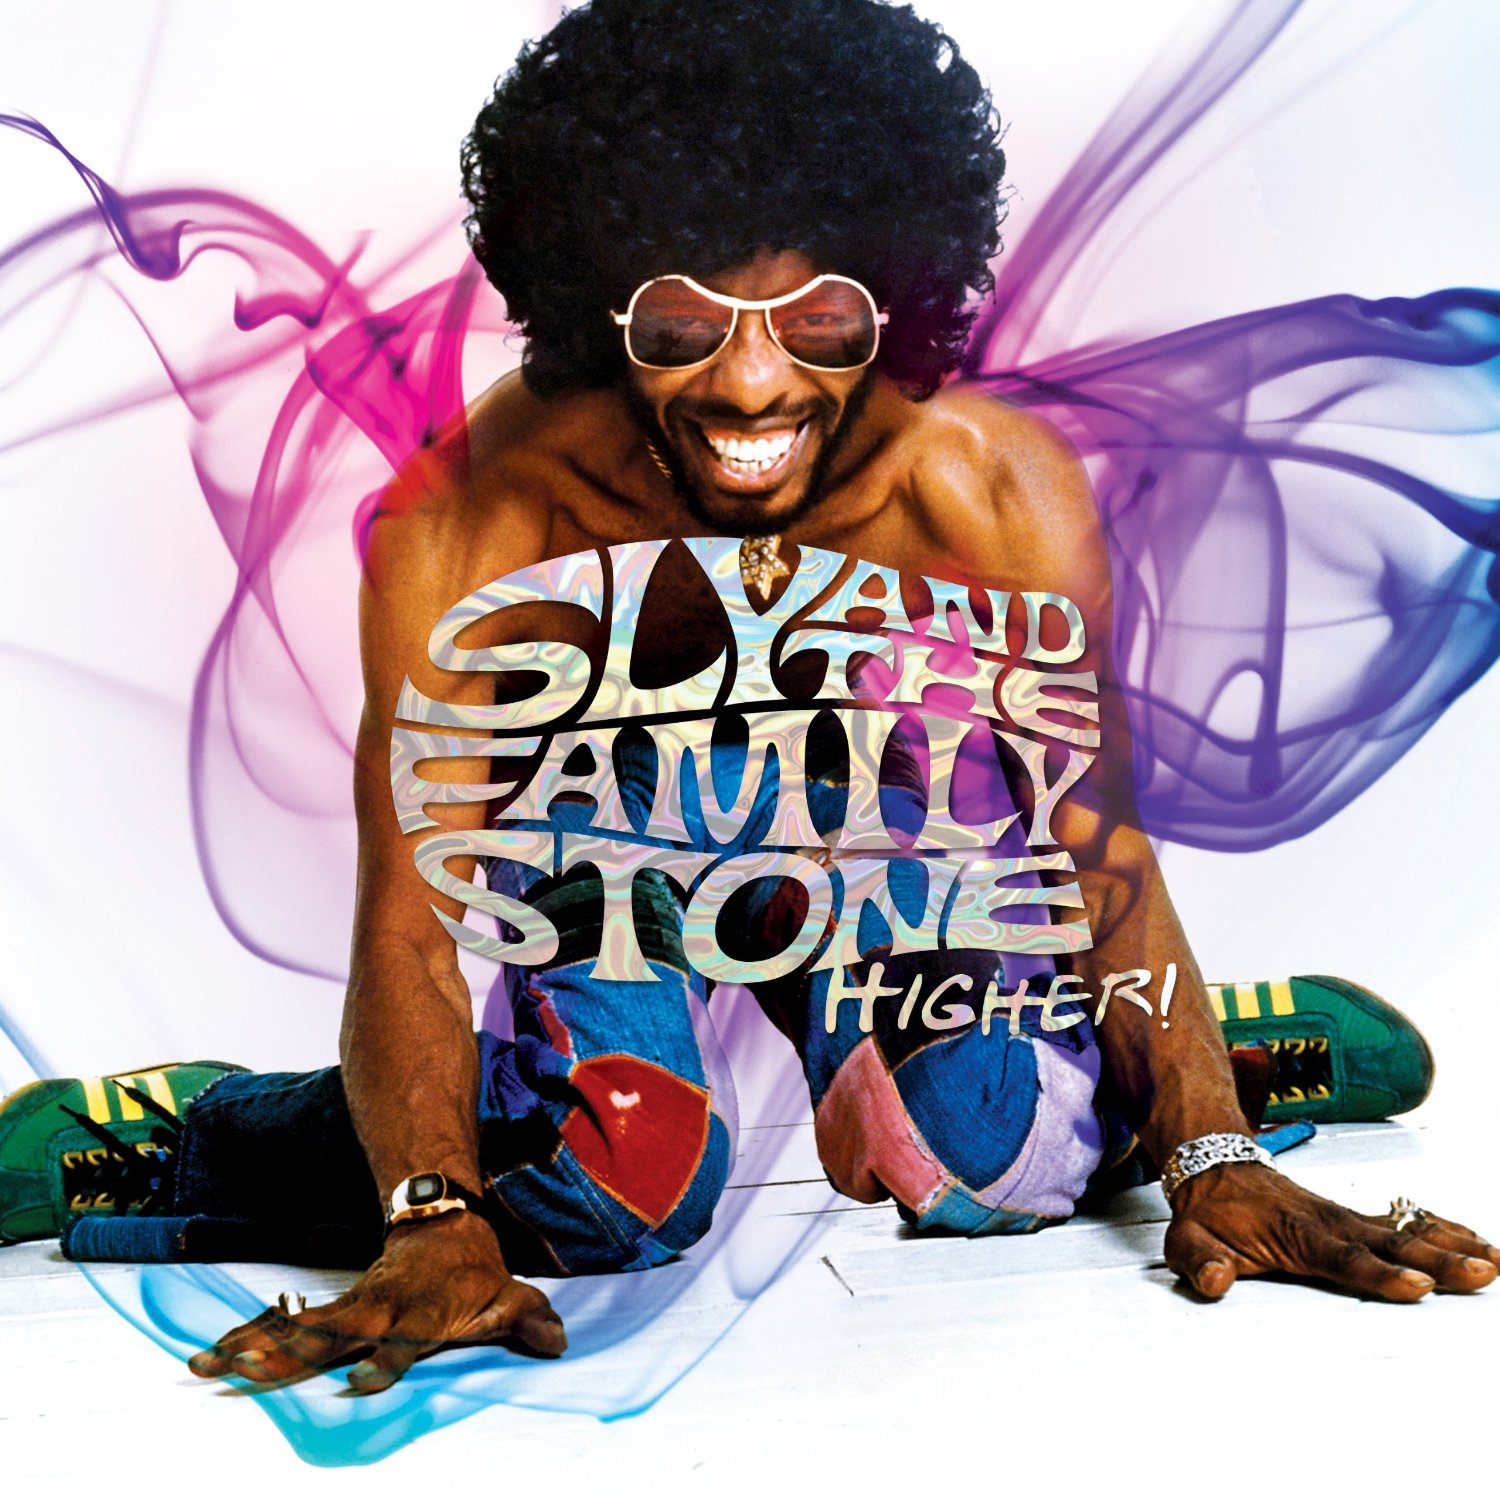 Sly and the Family Stone: Higher!